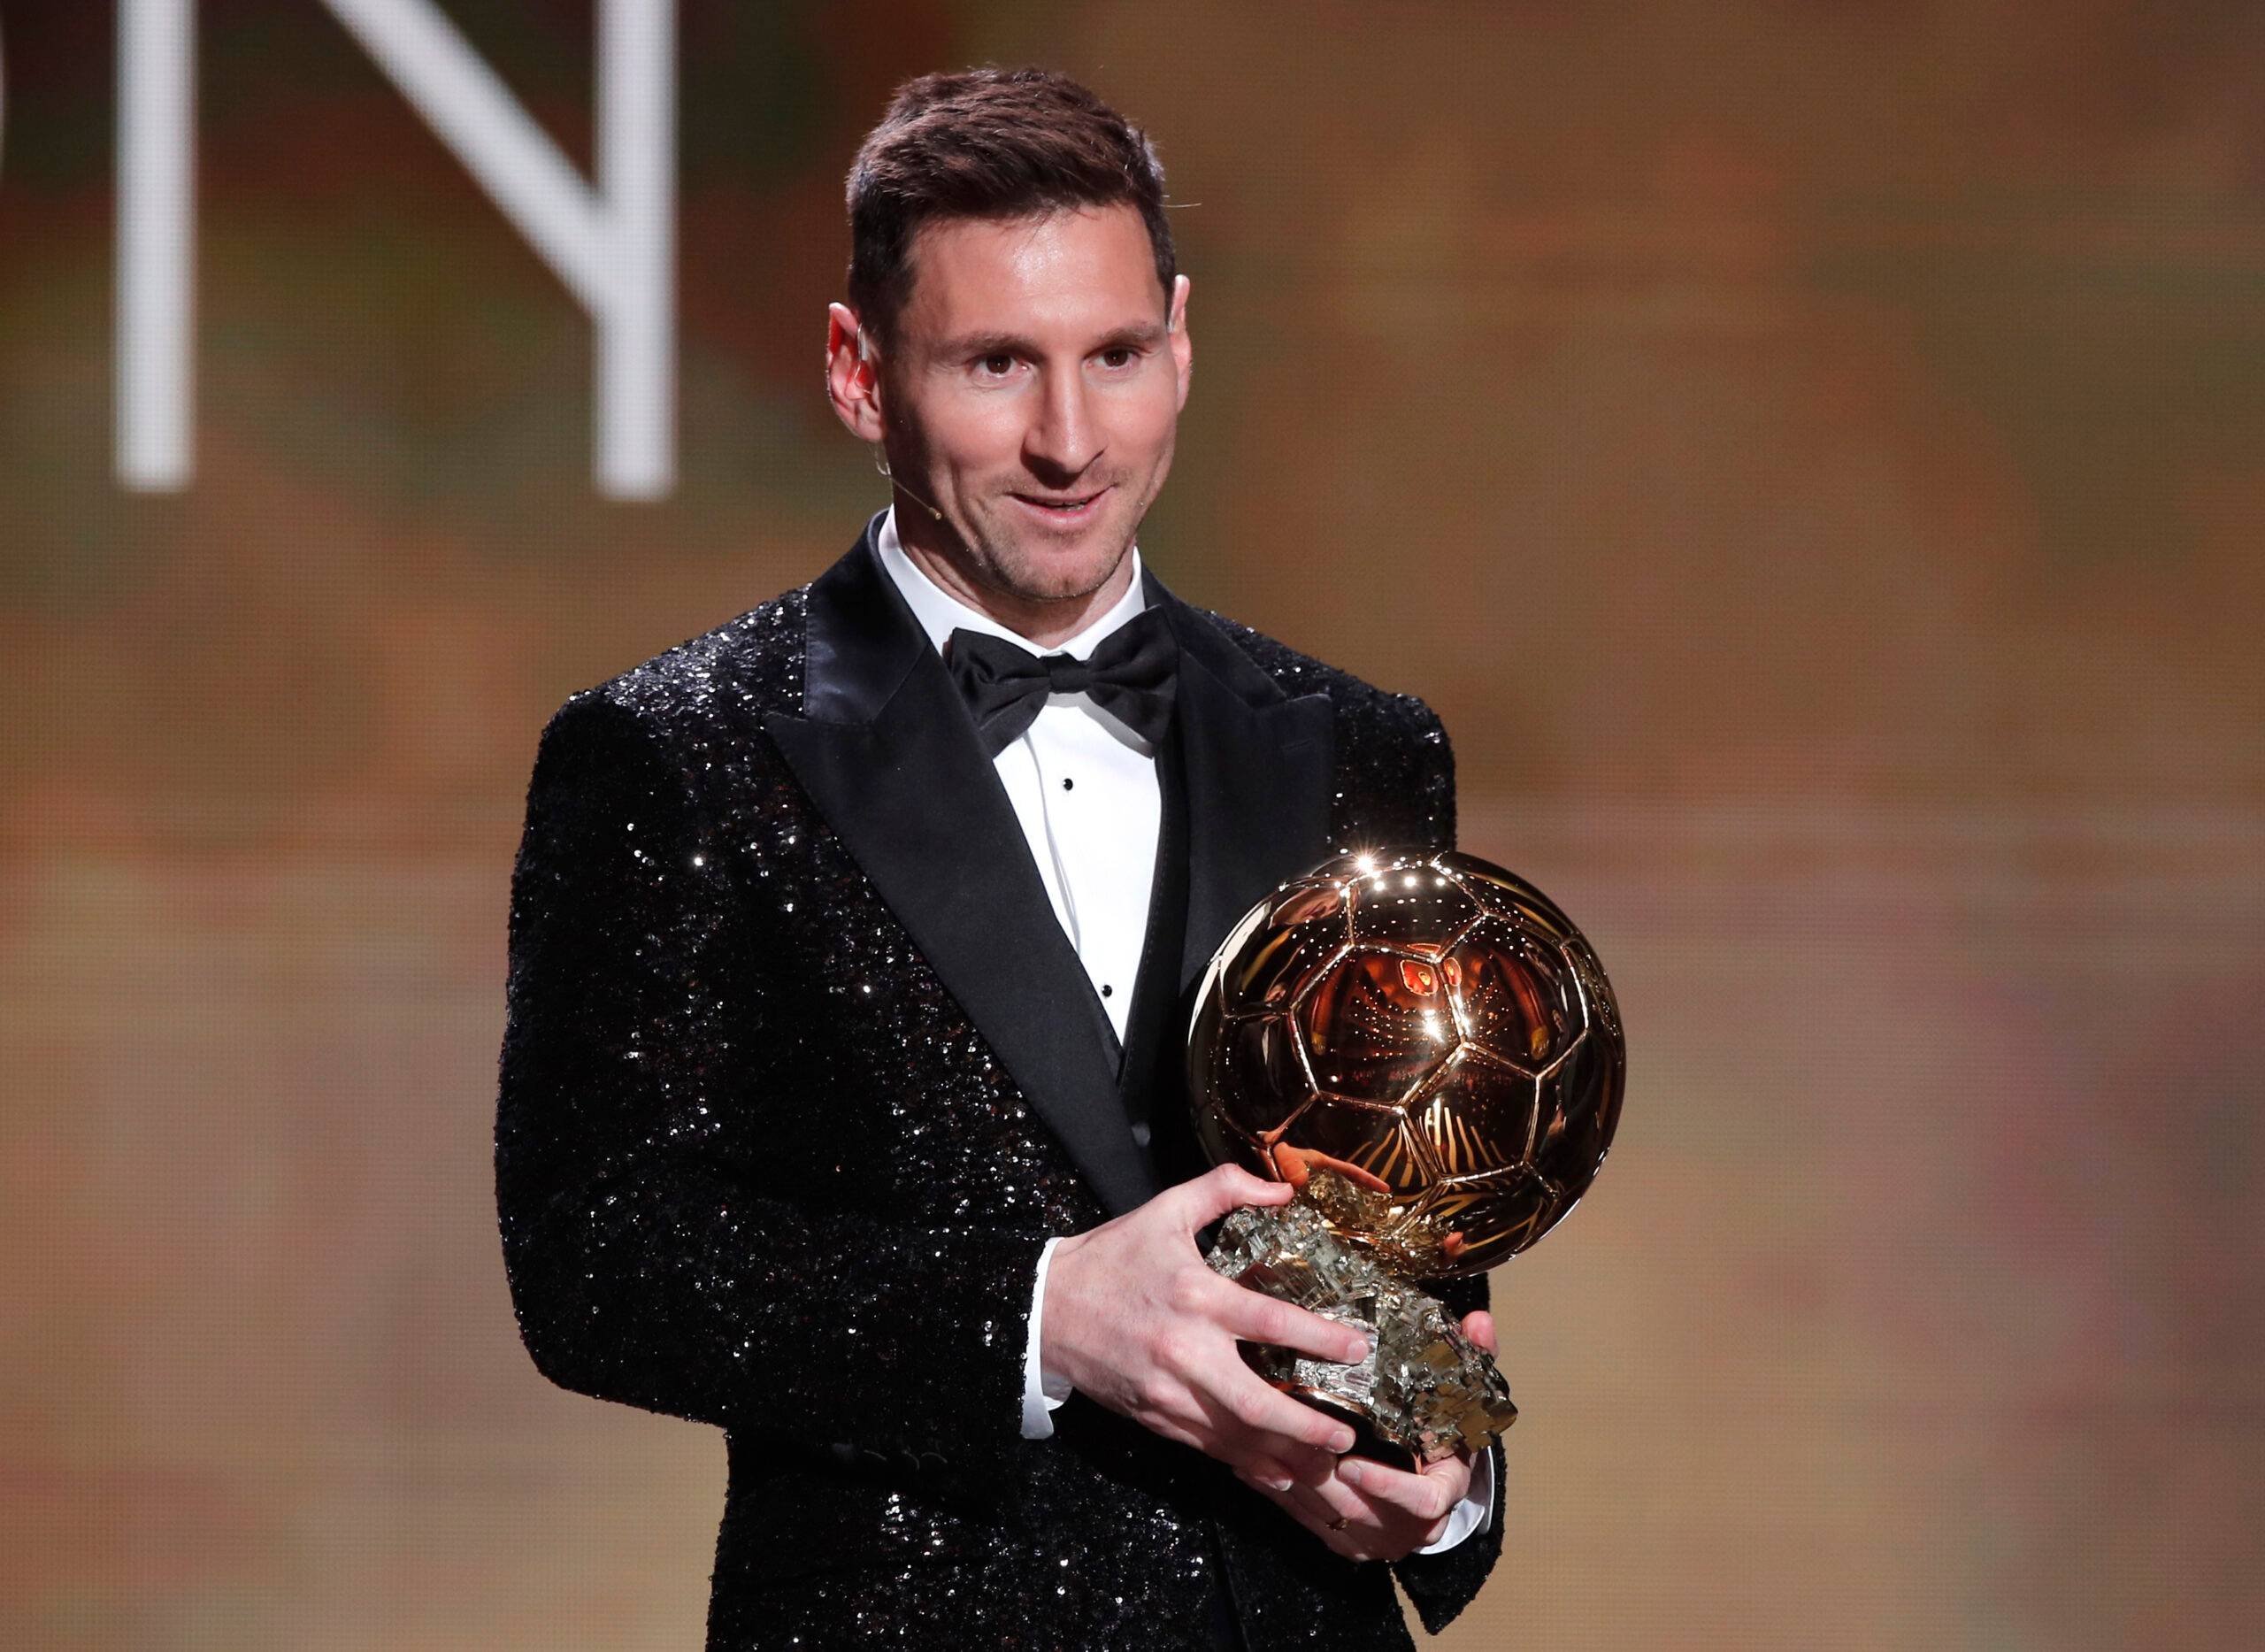 Messi lifts the Ballon d'Or.